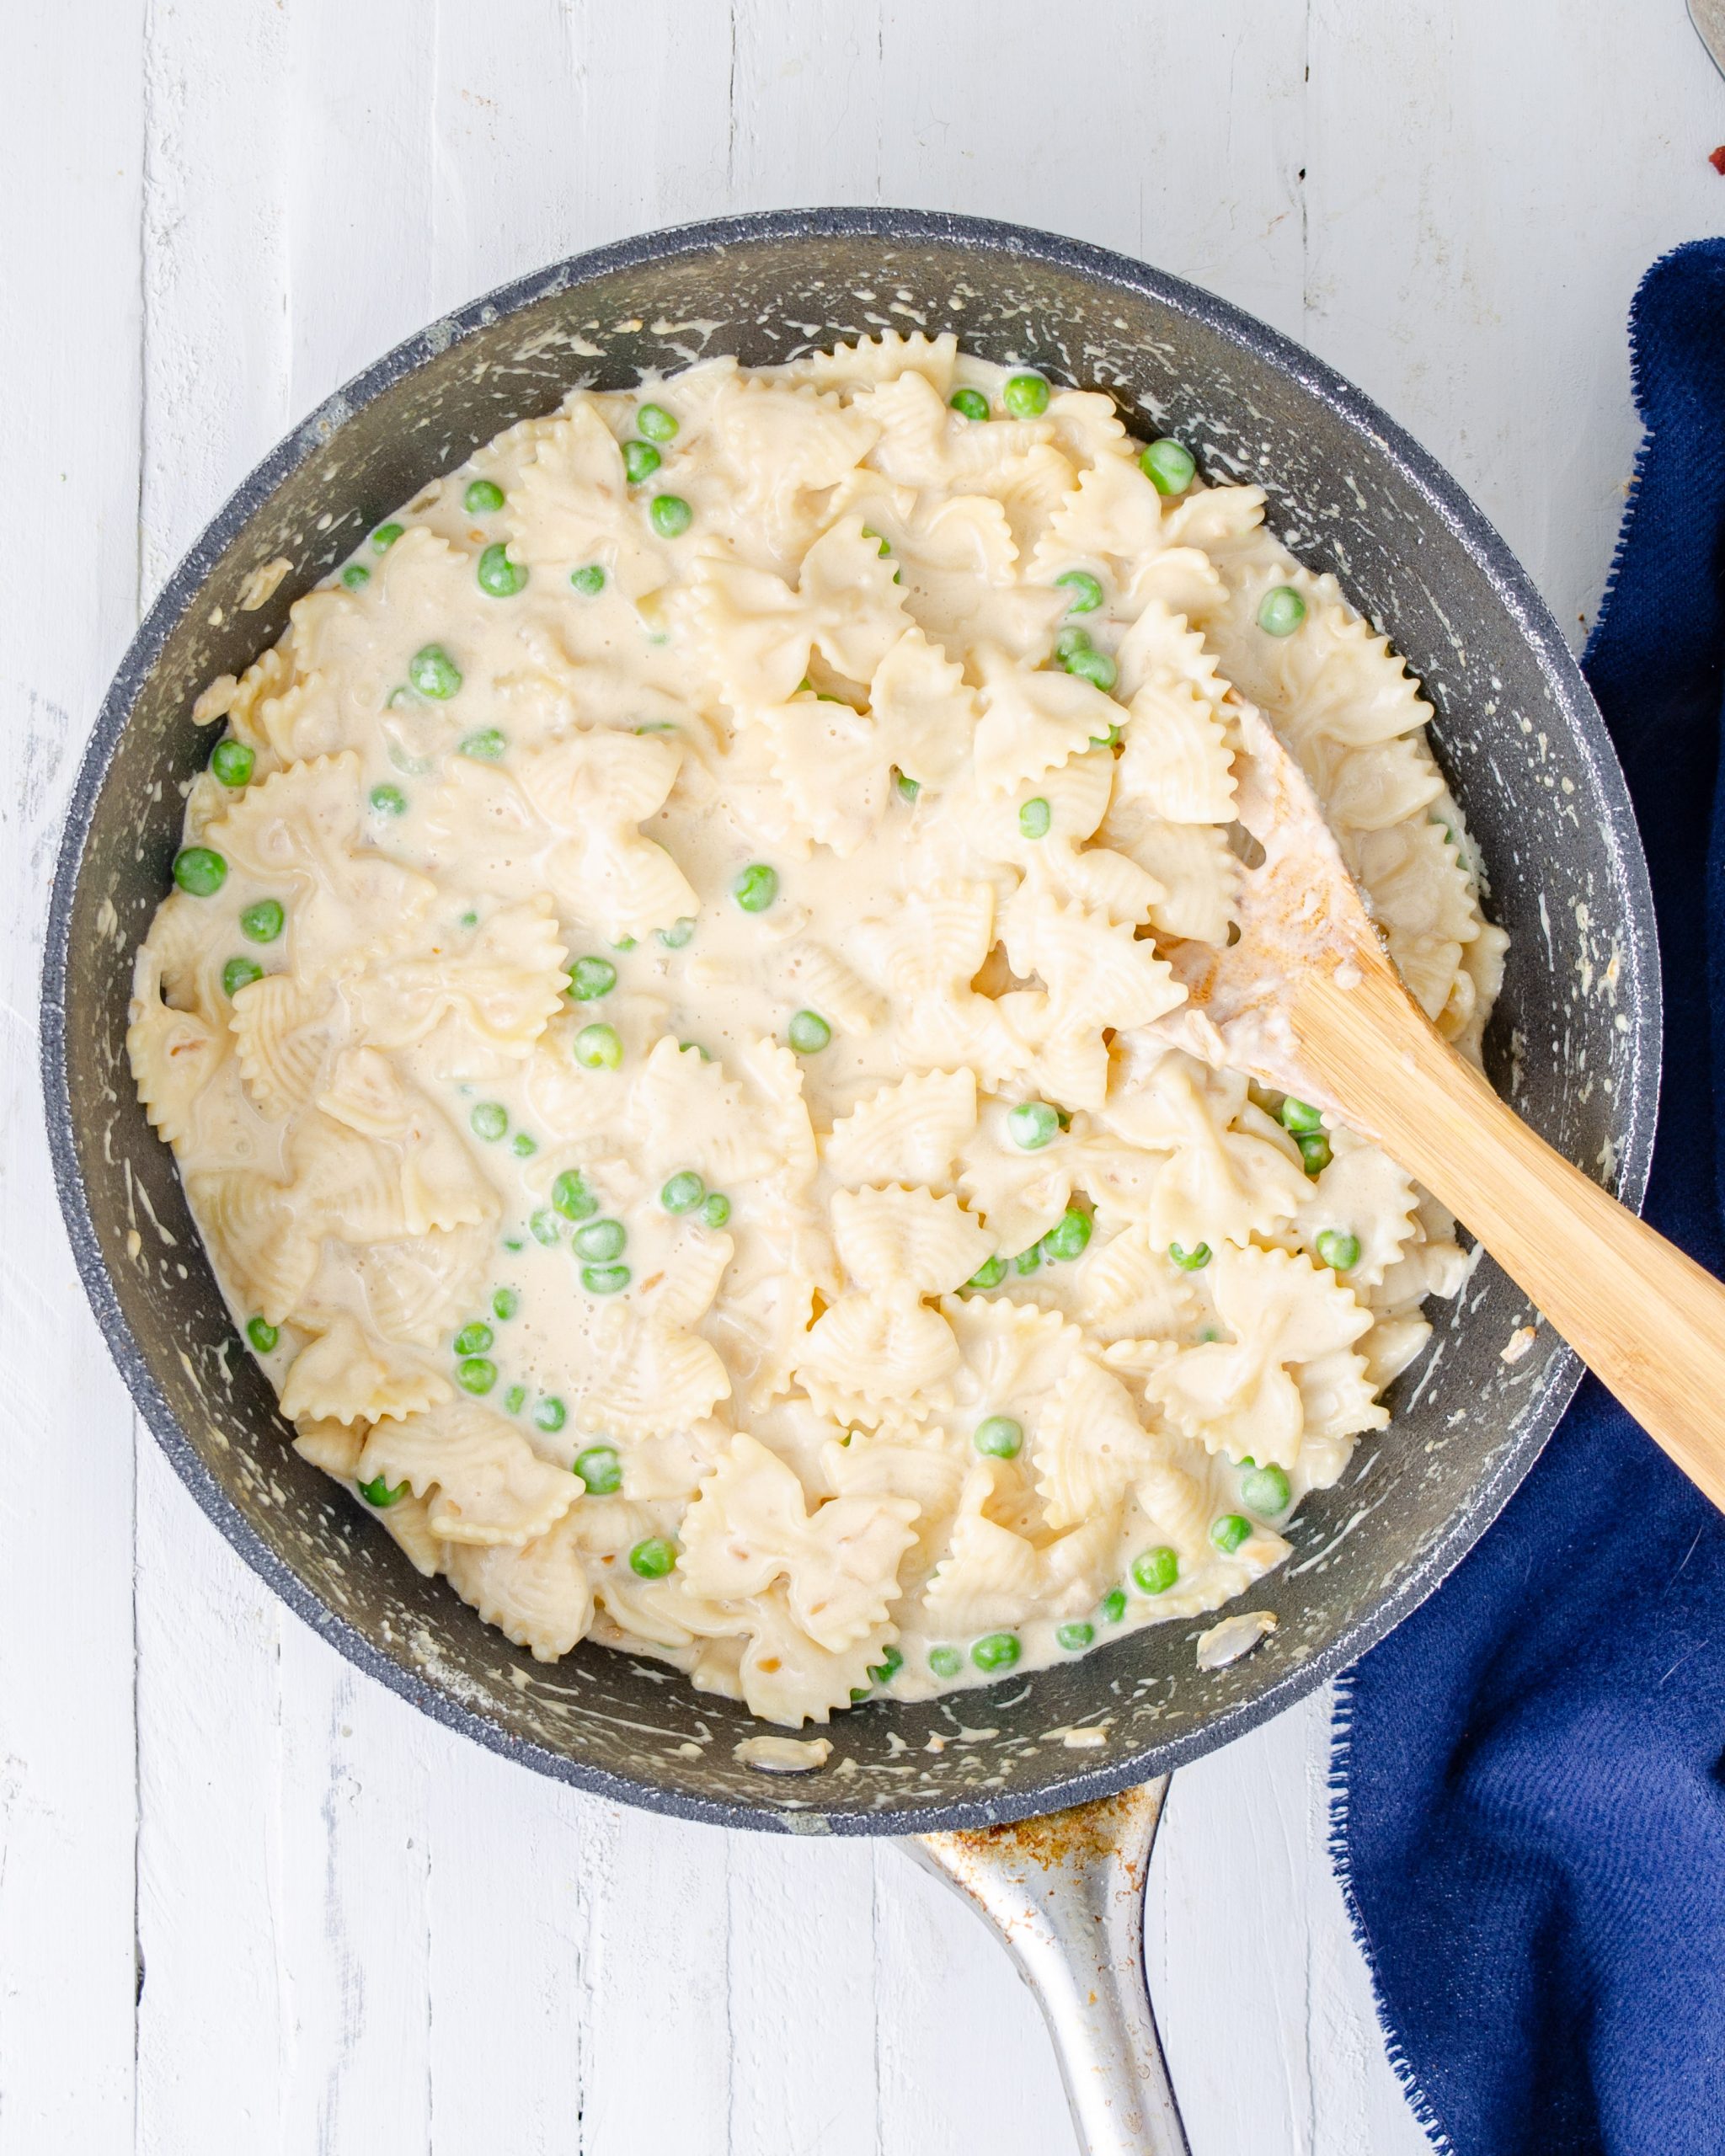 Place the pasta, parmesan cheese, and peas into the skillet with the sauce, and stir to coat well. 